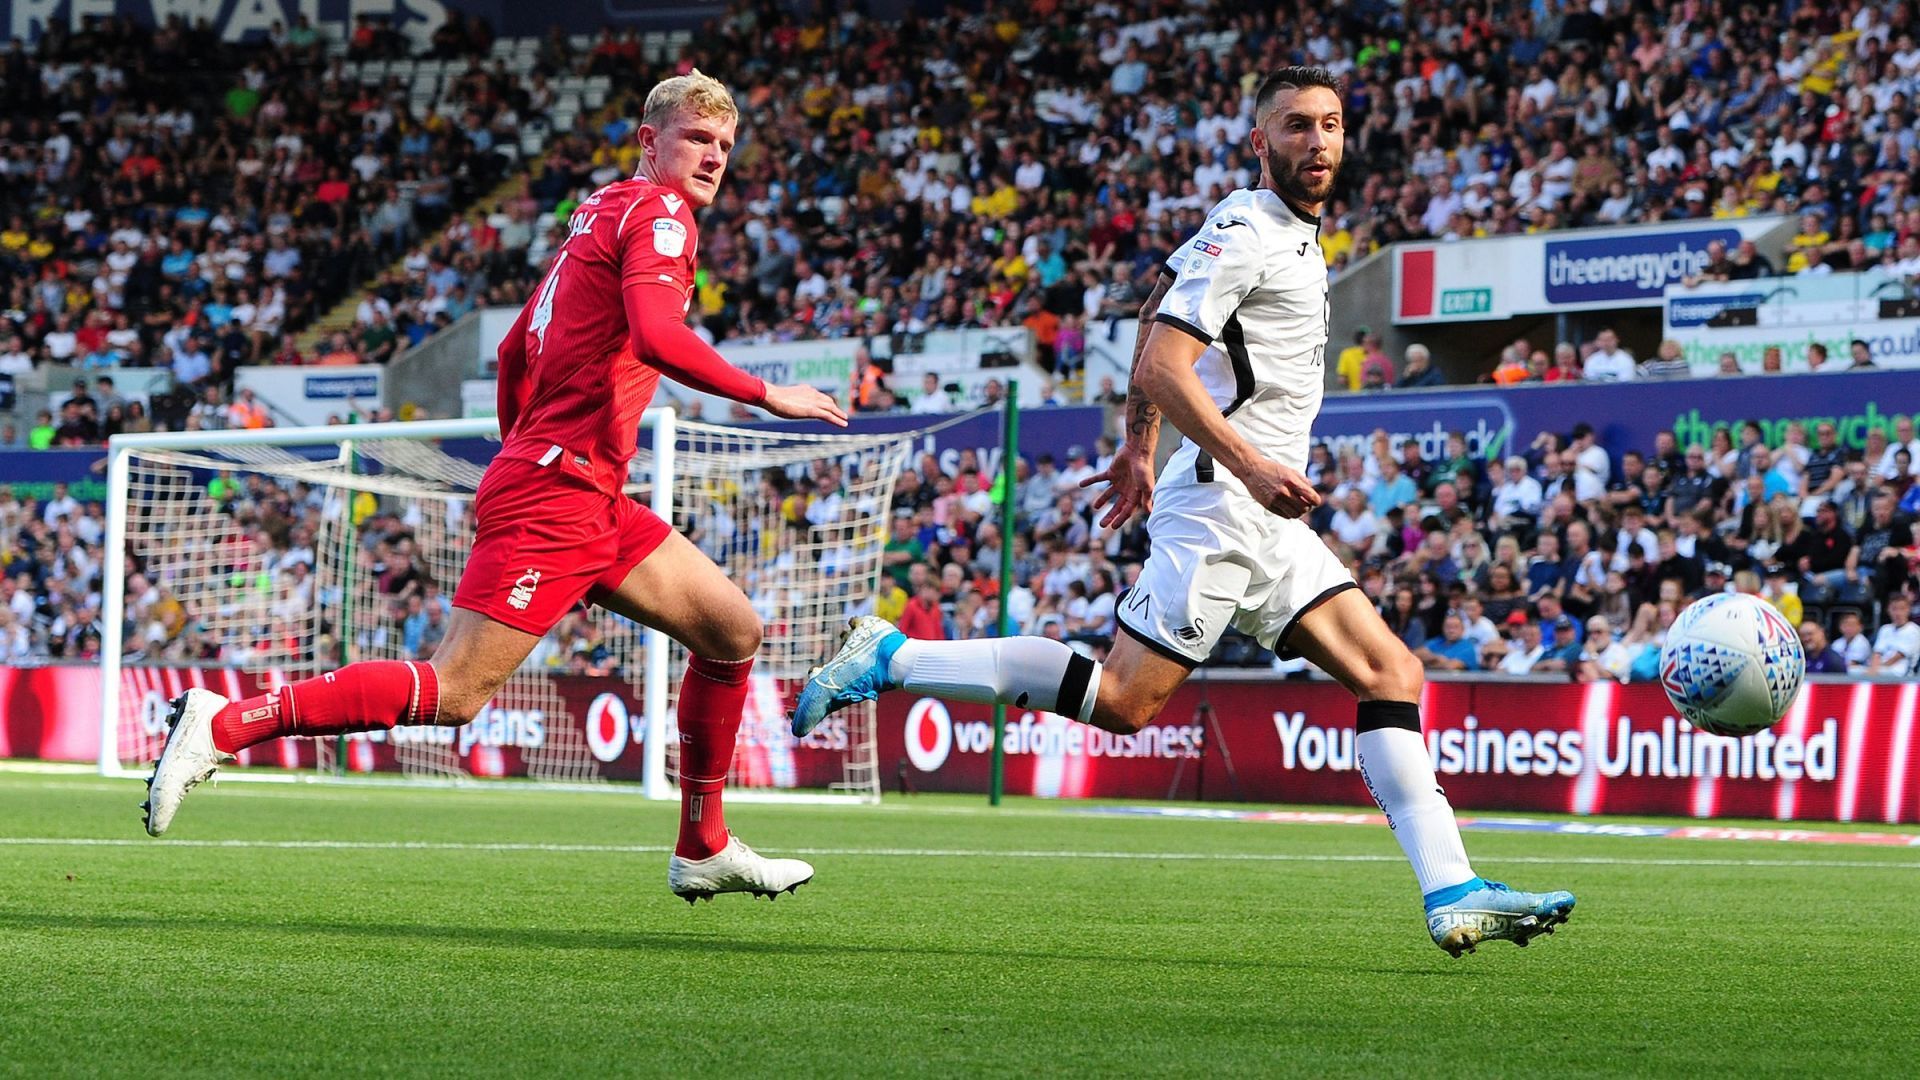 Swansea City are looking to overcome Nottingham on the table with a win